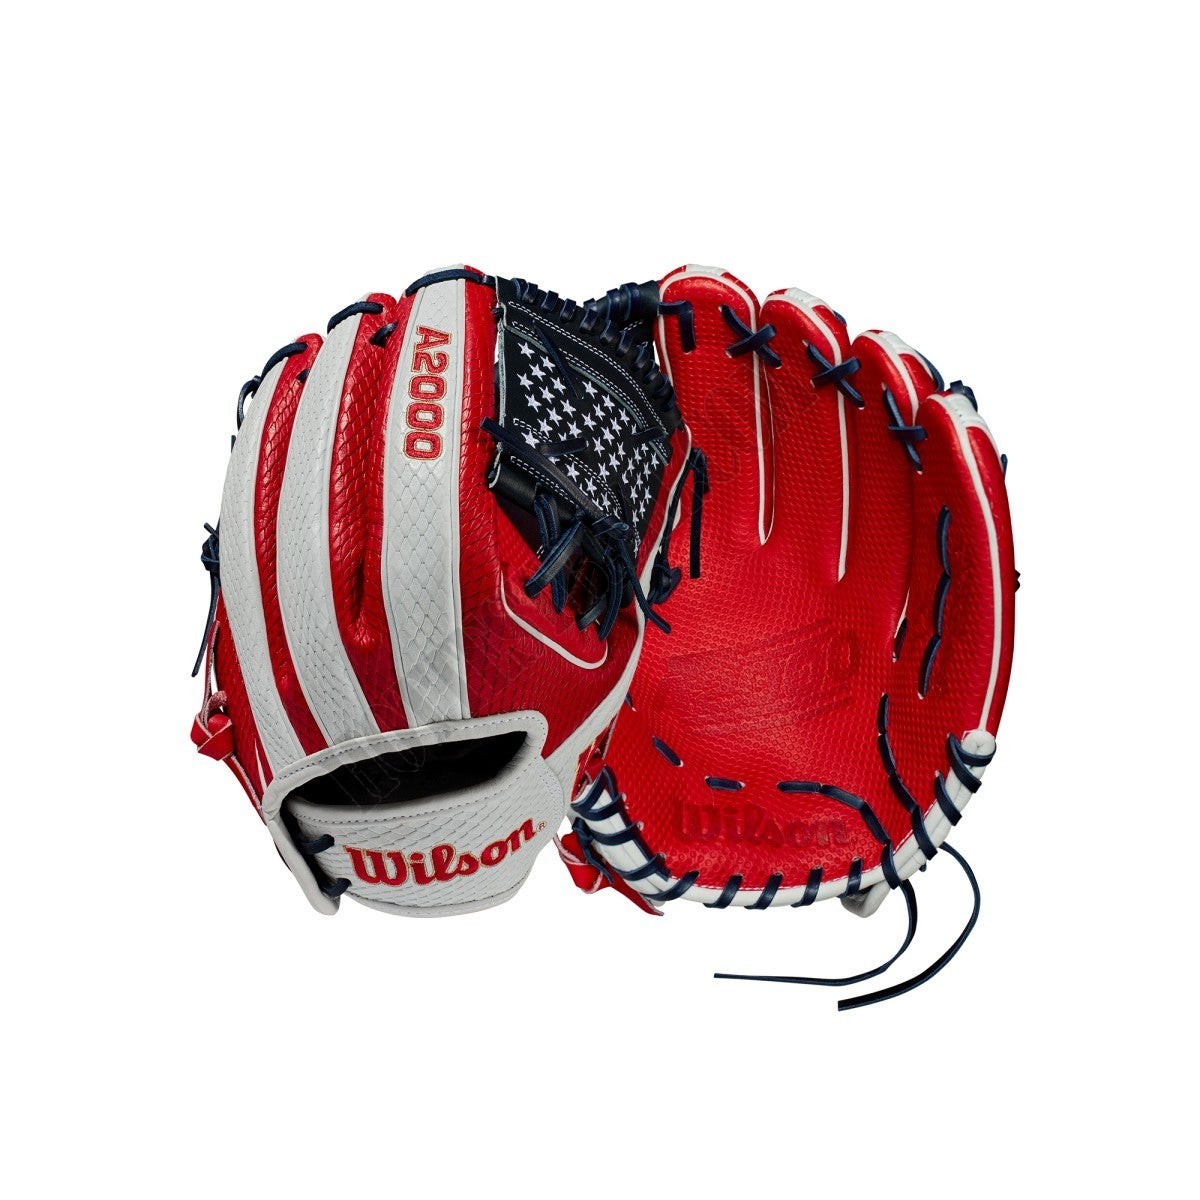 2021 A2000 KS7 GM 12" Infield Fastpitch Glove ● Wilson Promotions - -0